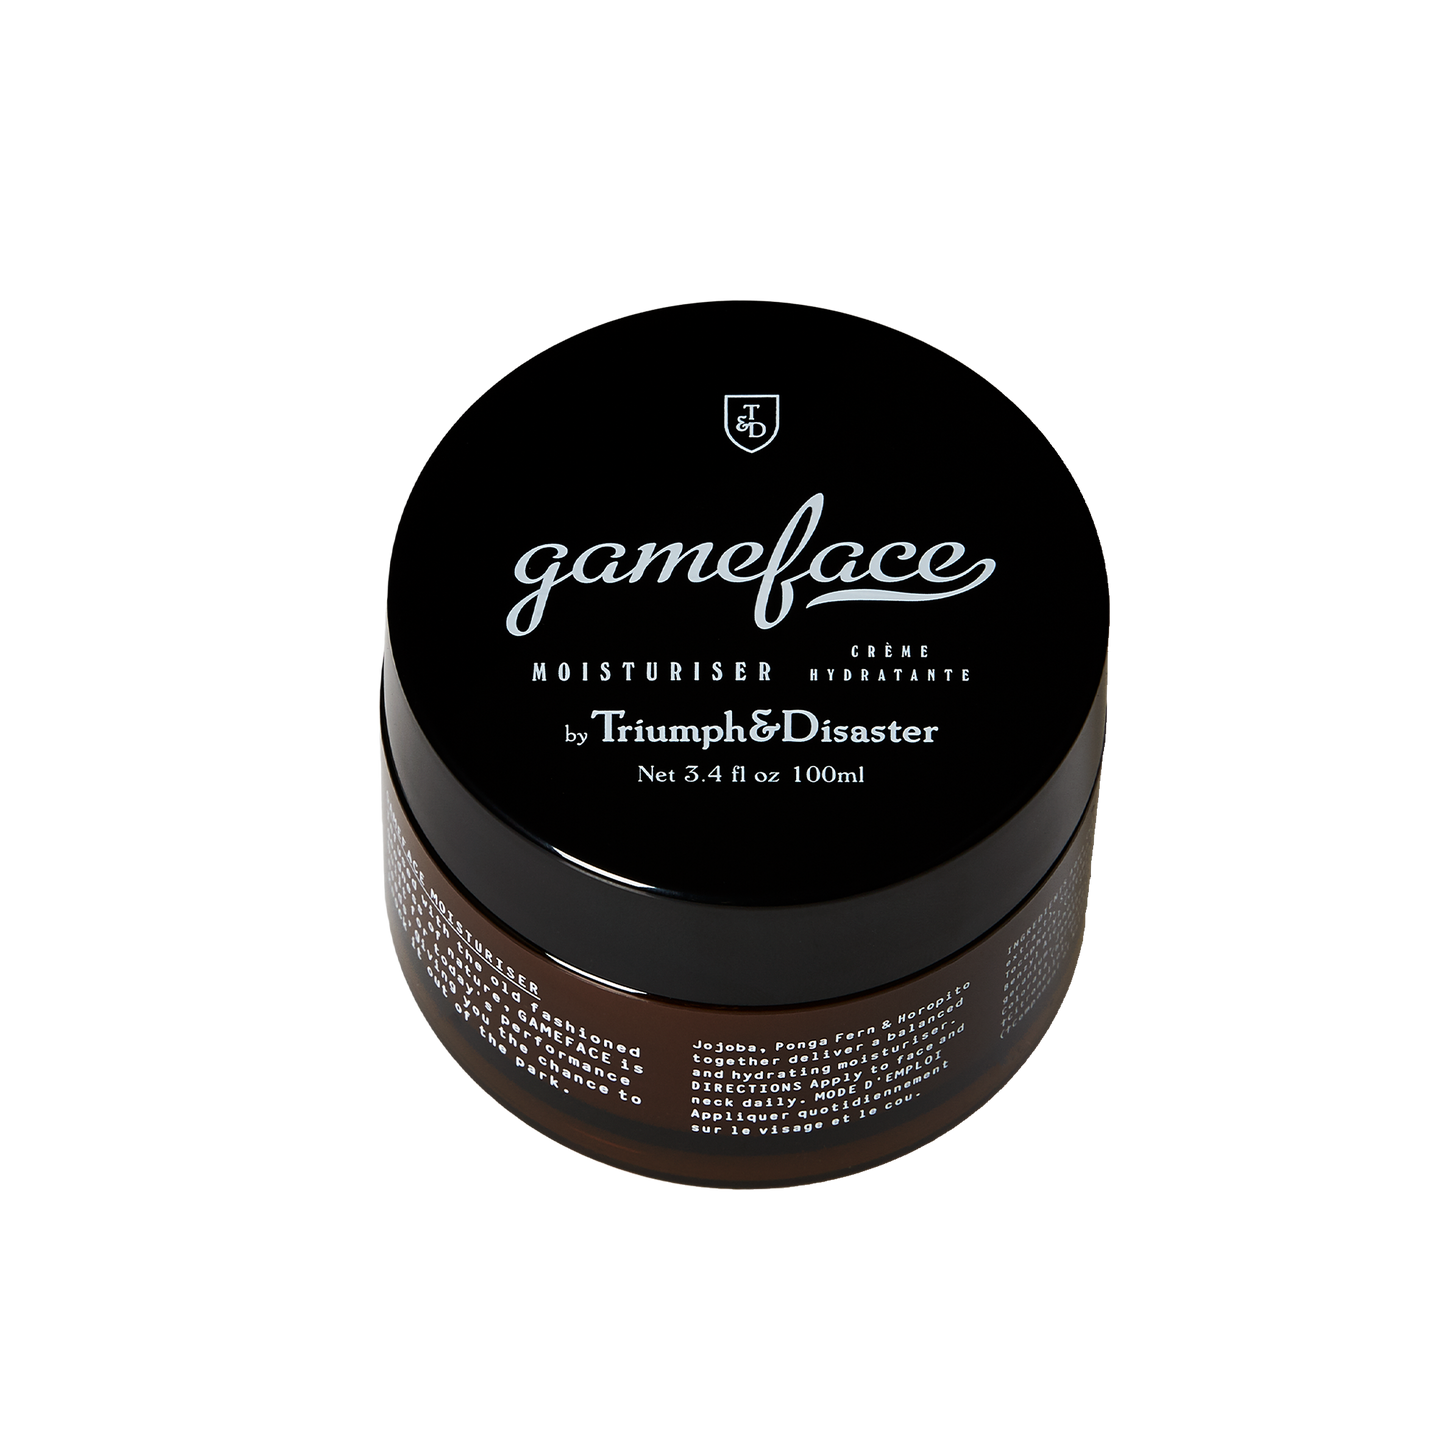 Triumph and Disaster Gameface Moisturiser - Jar: Gameface moisturizer is a tool to serve and protect you against the elements. Specifically engineered to be light on the skin and easily absorbed, Gameface is a unique formulation of Jojoba extract, Horopito oil, Ponga fern (Cumingii) and Vitamin E, combined with a subtle infusion of essential oils to deliver a fragrance we call 'smoke and wood'. The result is a nutrient rich, hydrating cream that will leave skin feeling toned, supple and fresh.